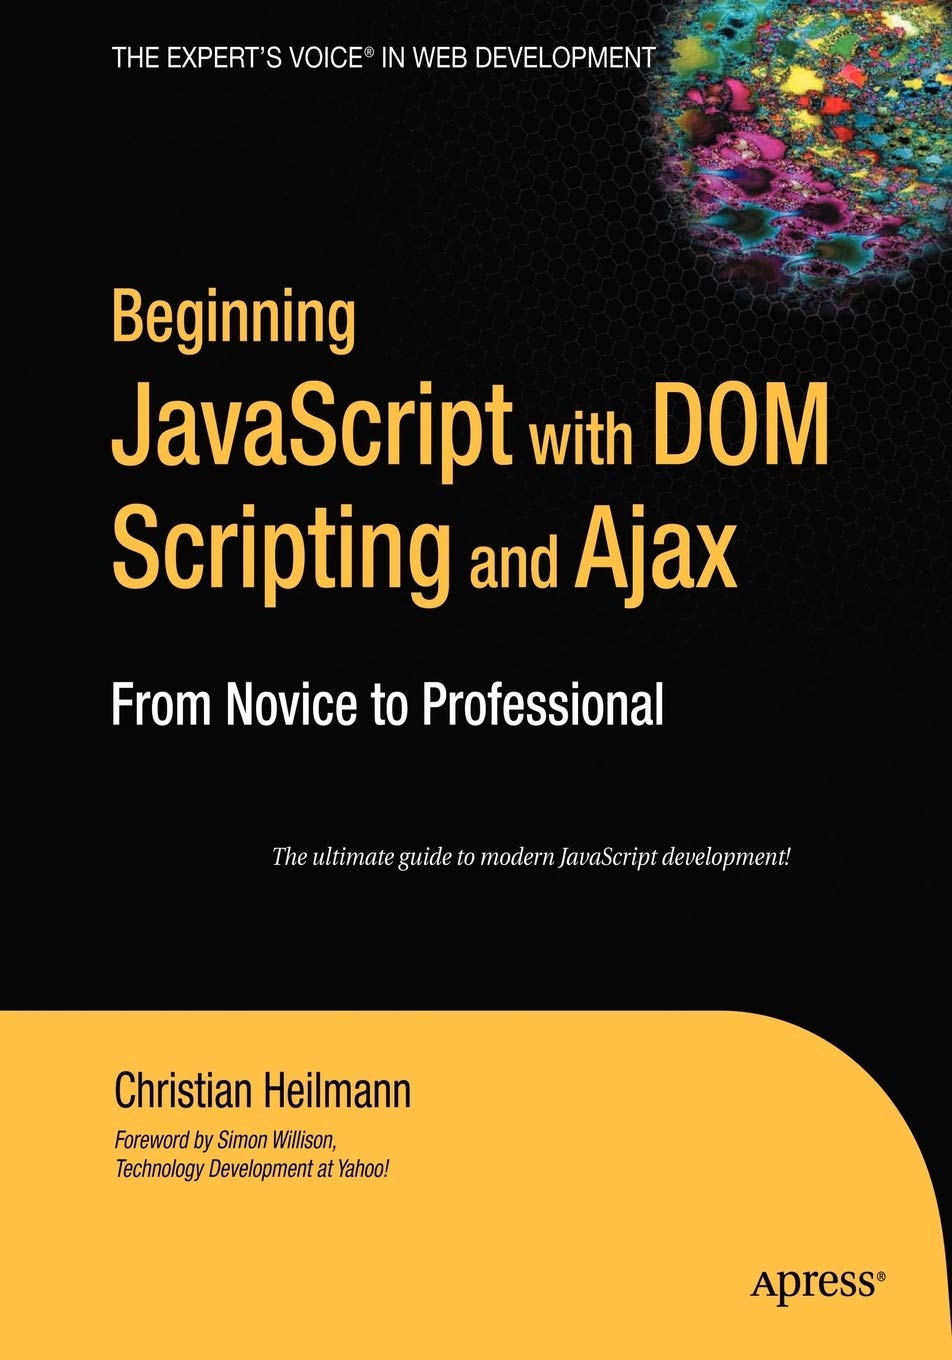 Beginning JavaScript with DOM Scripting and Ajax: From Novice to Professional by Christian Heilmann